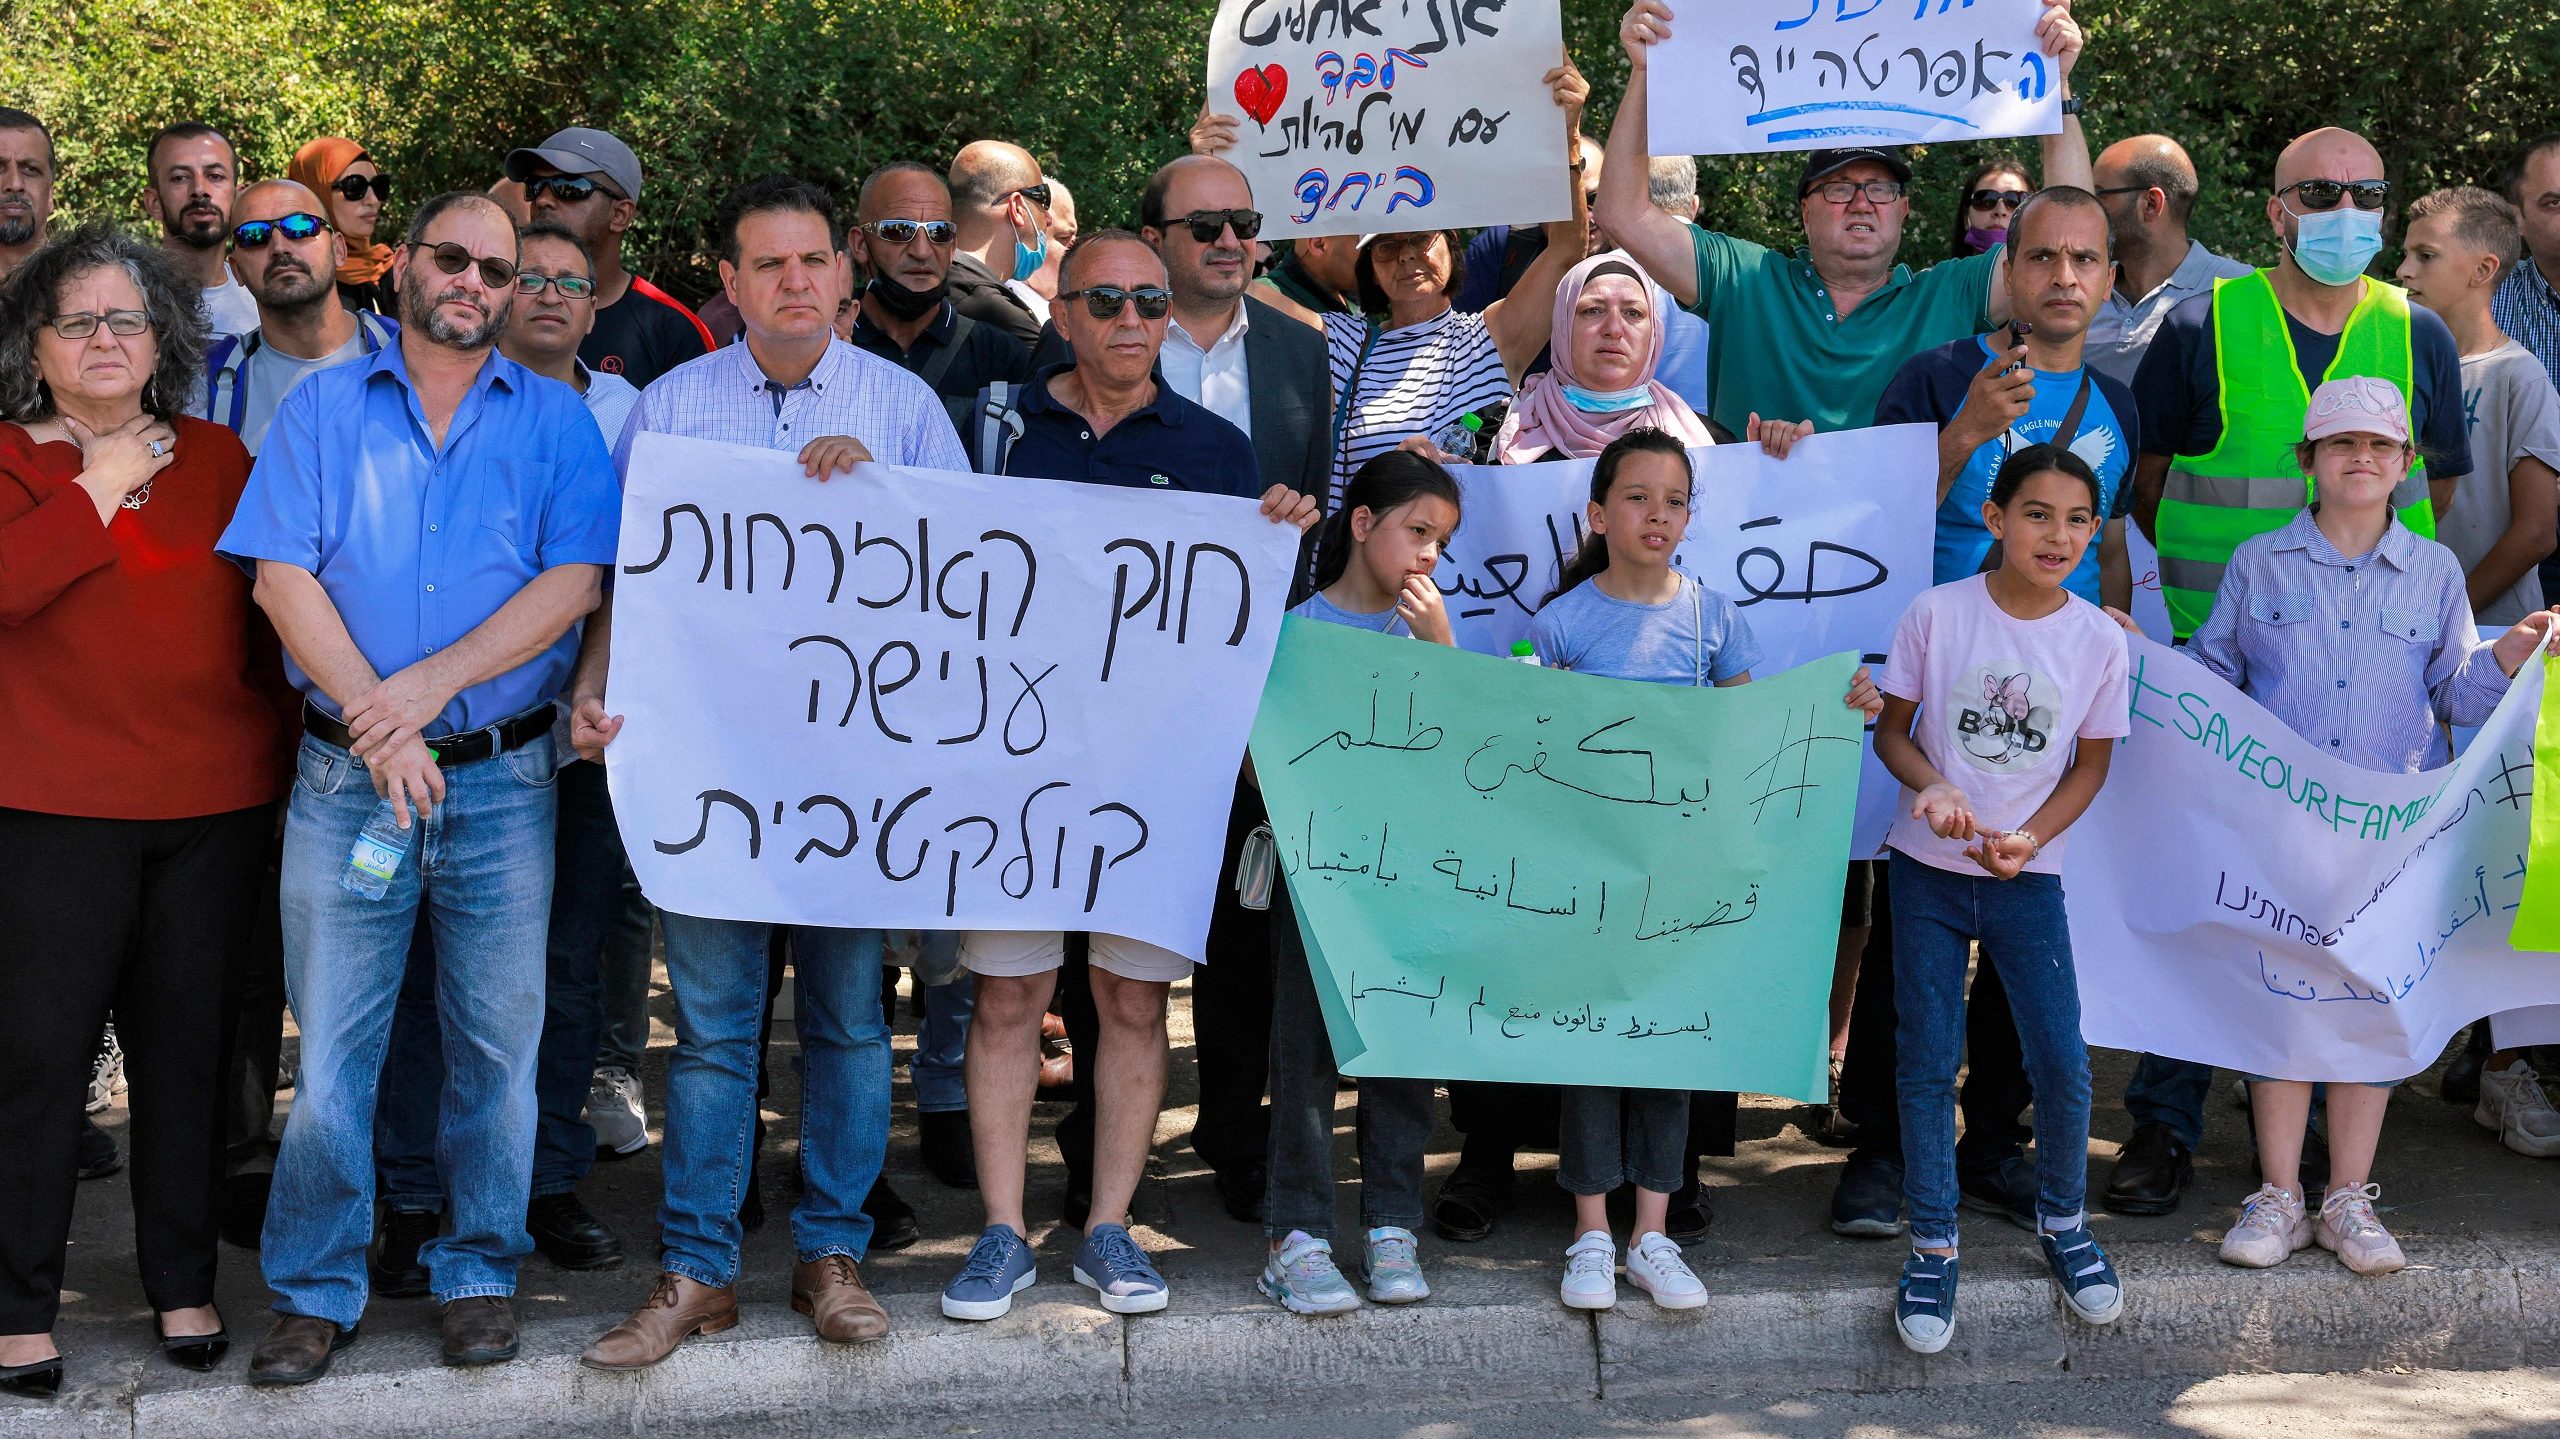 Israel’s Knesset to Vote on Law Blocking Palestinian Spouses’ Residency Rights